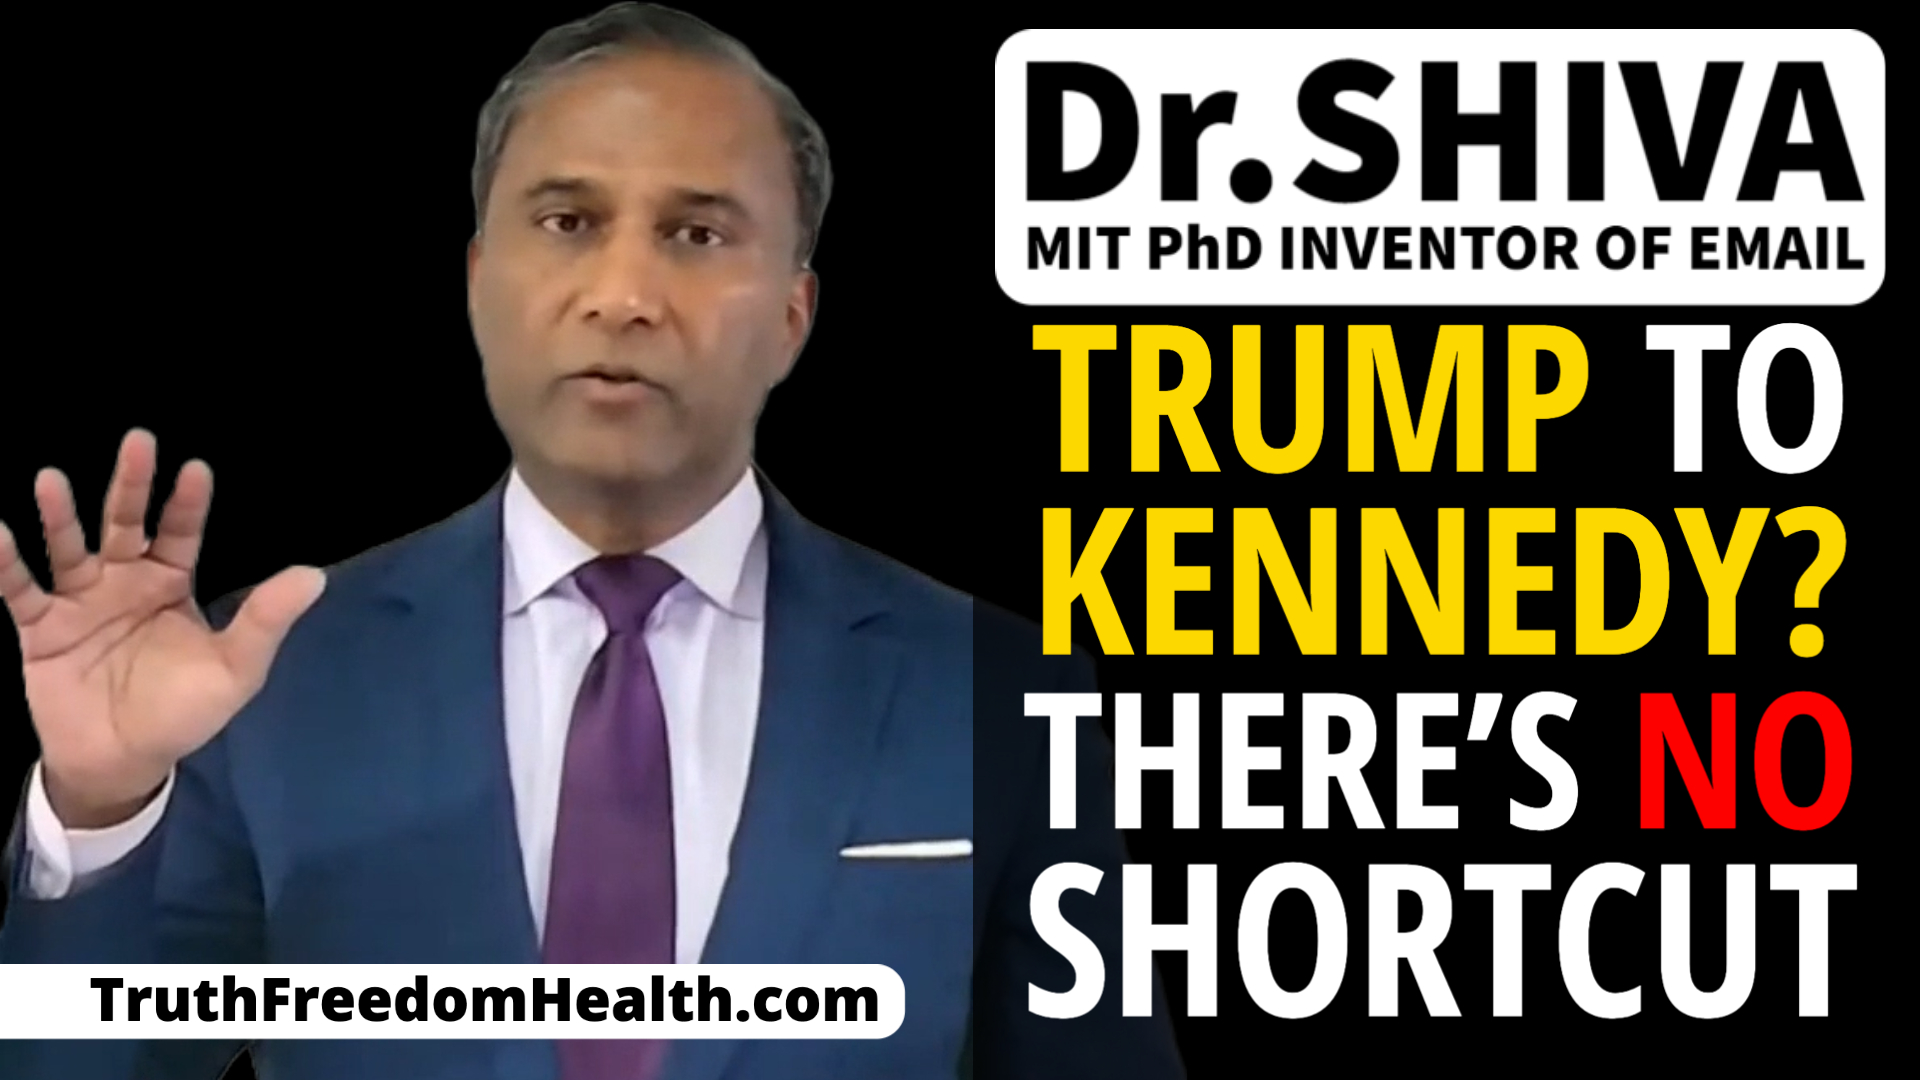 Dr.SHIVA LIVE: Trump To Kennedy? There’s NO Shortcut - Build THE Movement for Truth Freedom Health®